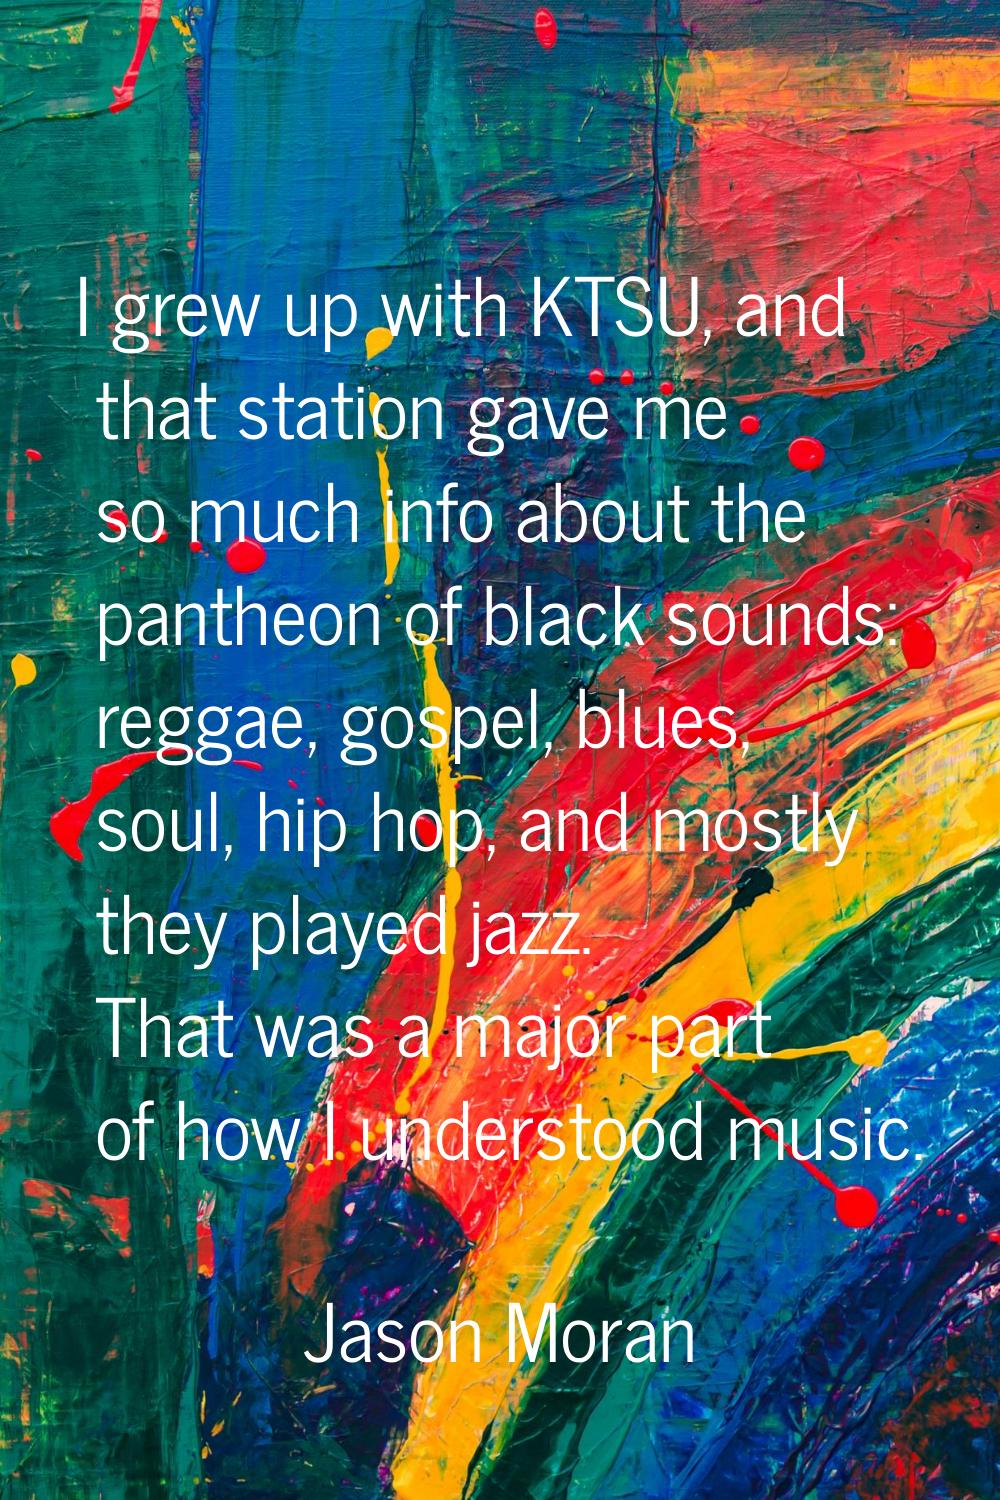 I grew up with KTSU, and that station gave me so much info about the pantheon of black sounds: regg